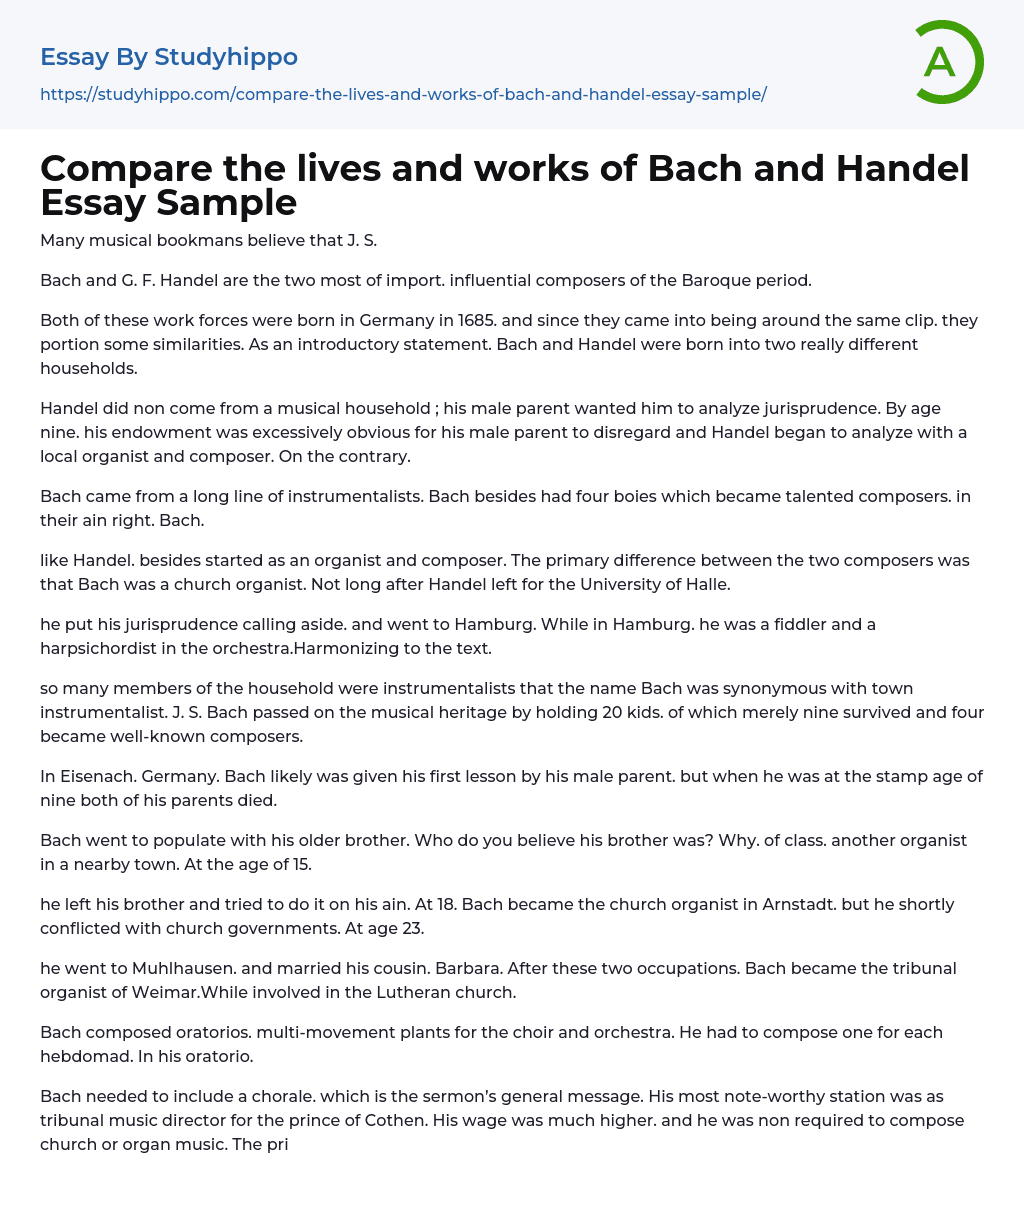 Compare the lives and works of Bach and Handel Essay Sample